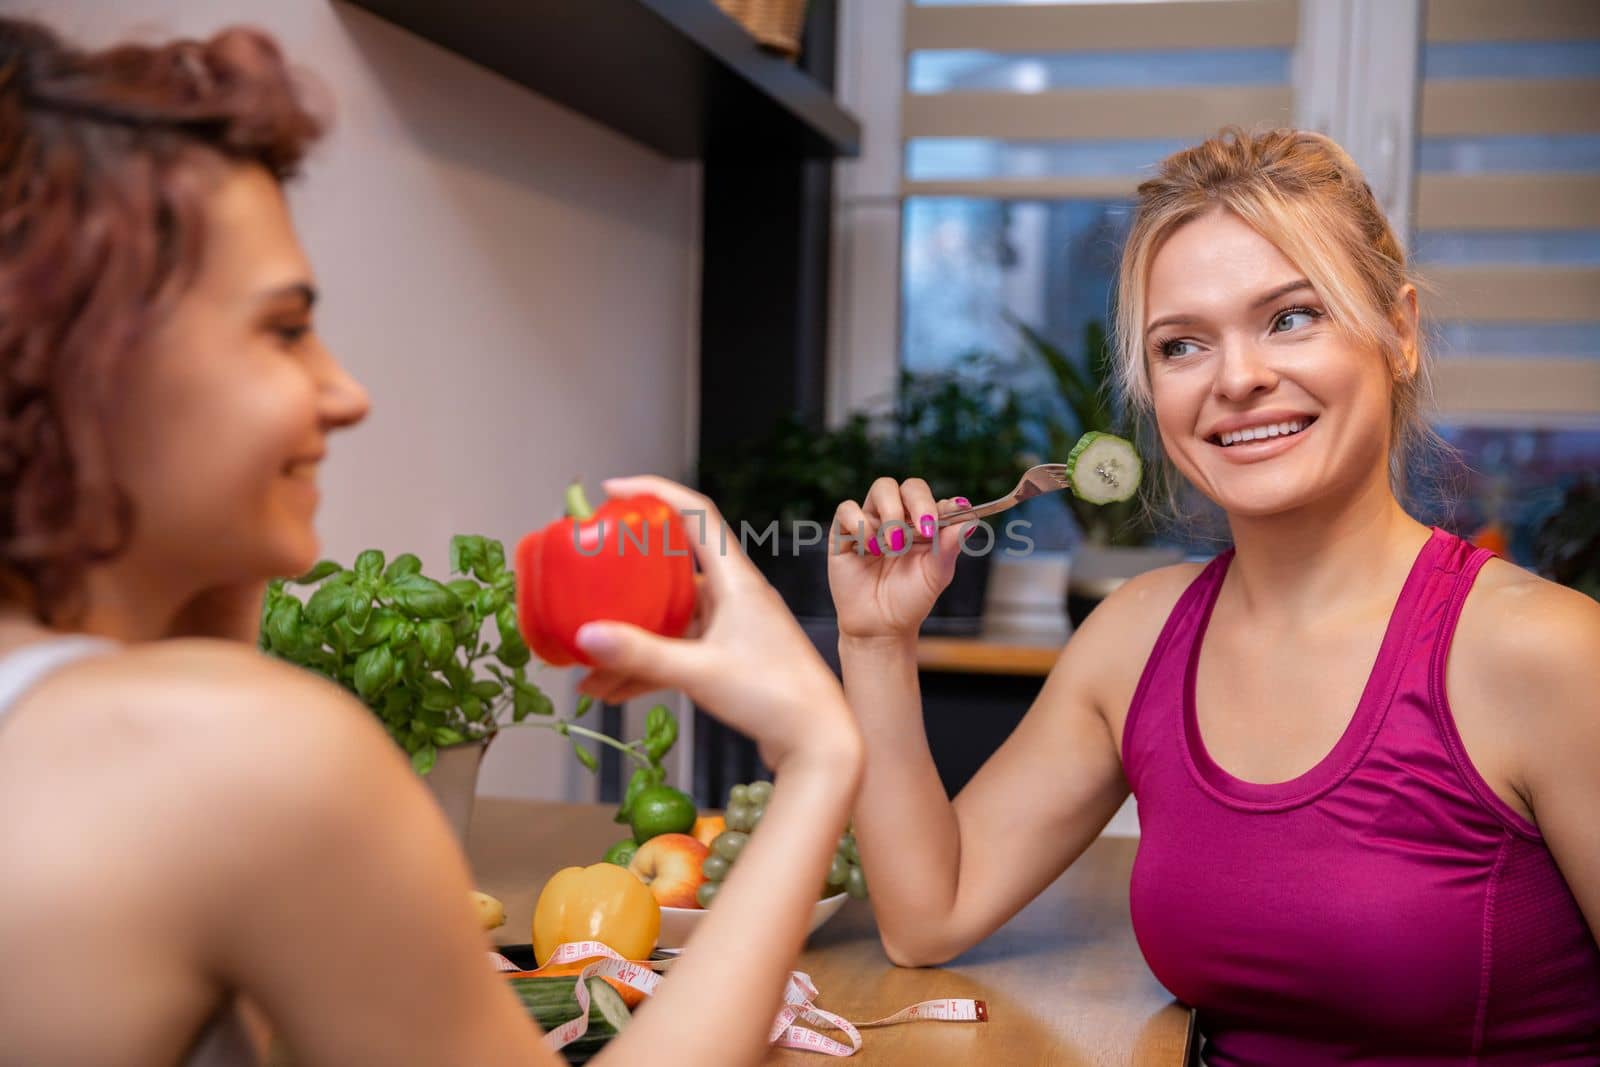 Two women are sitting in the kitchen at a table facing each other. The woman in the foreground holds a red bell pepper, the woman in the background holds a fork with a cucumber slice.